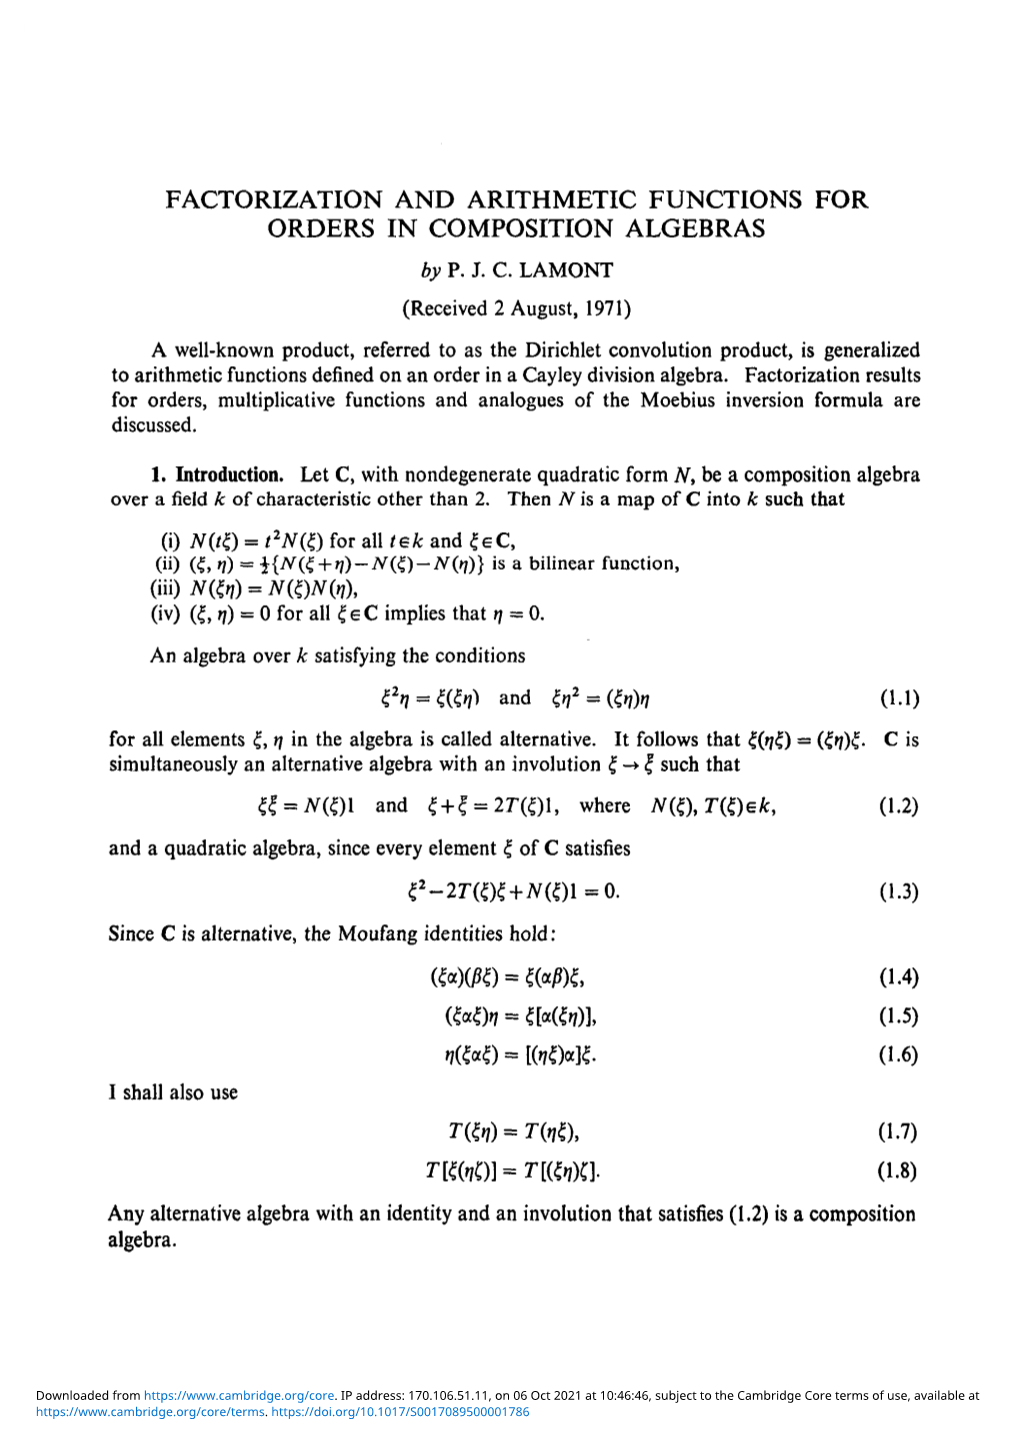 FACTORIZATION and ARITHMETIC FUNCTIONS for ORDERS in COMPOSITION ALGEBRAS by P